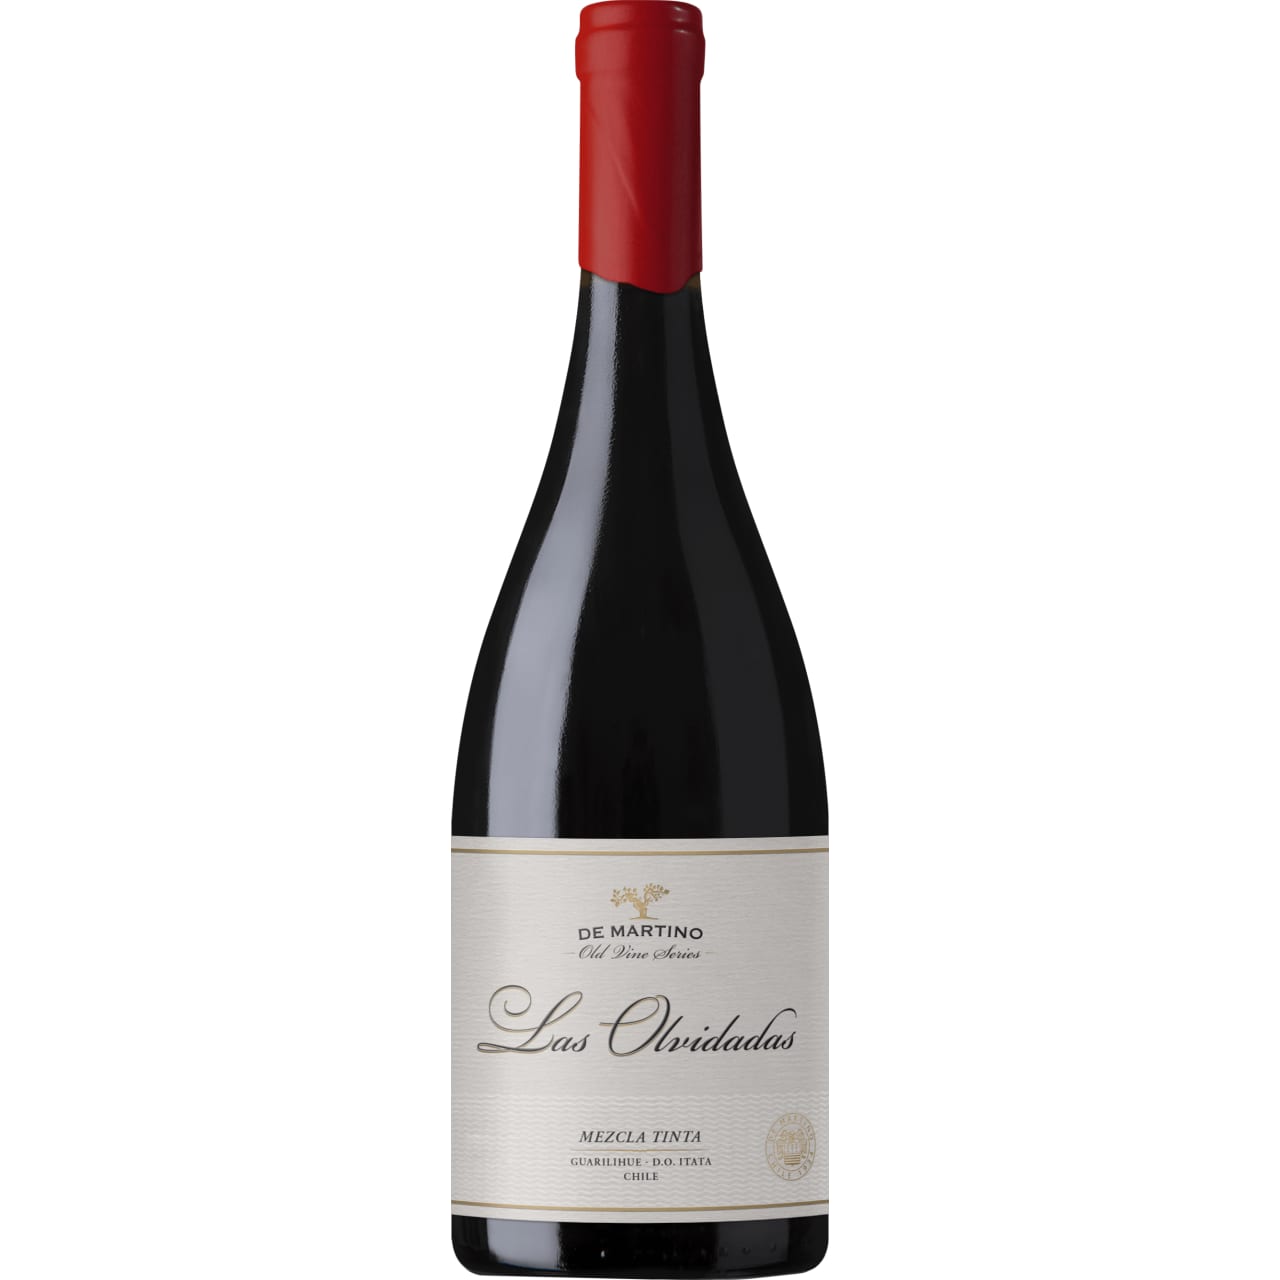 An attractive, perfumed character with red fruit, herbal and floral notes.